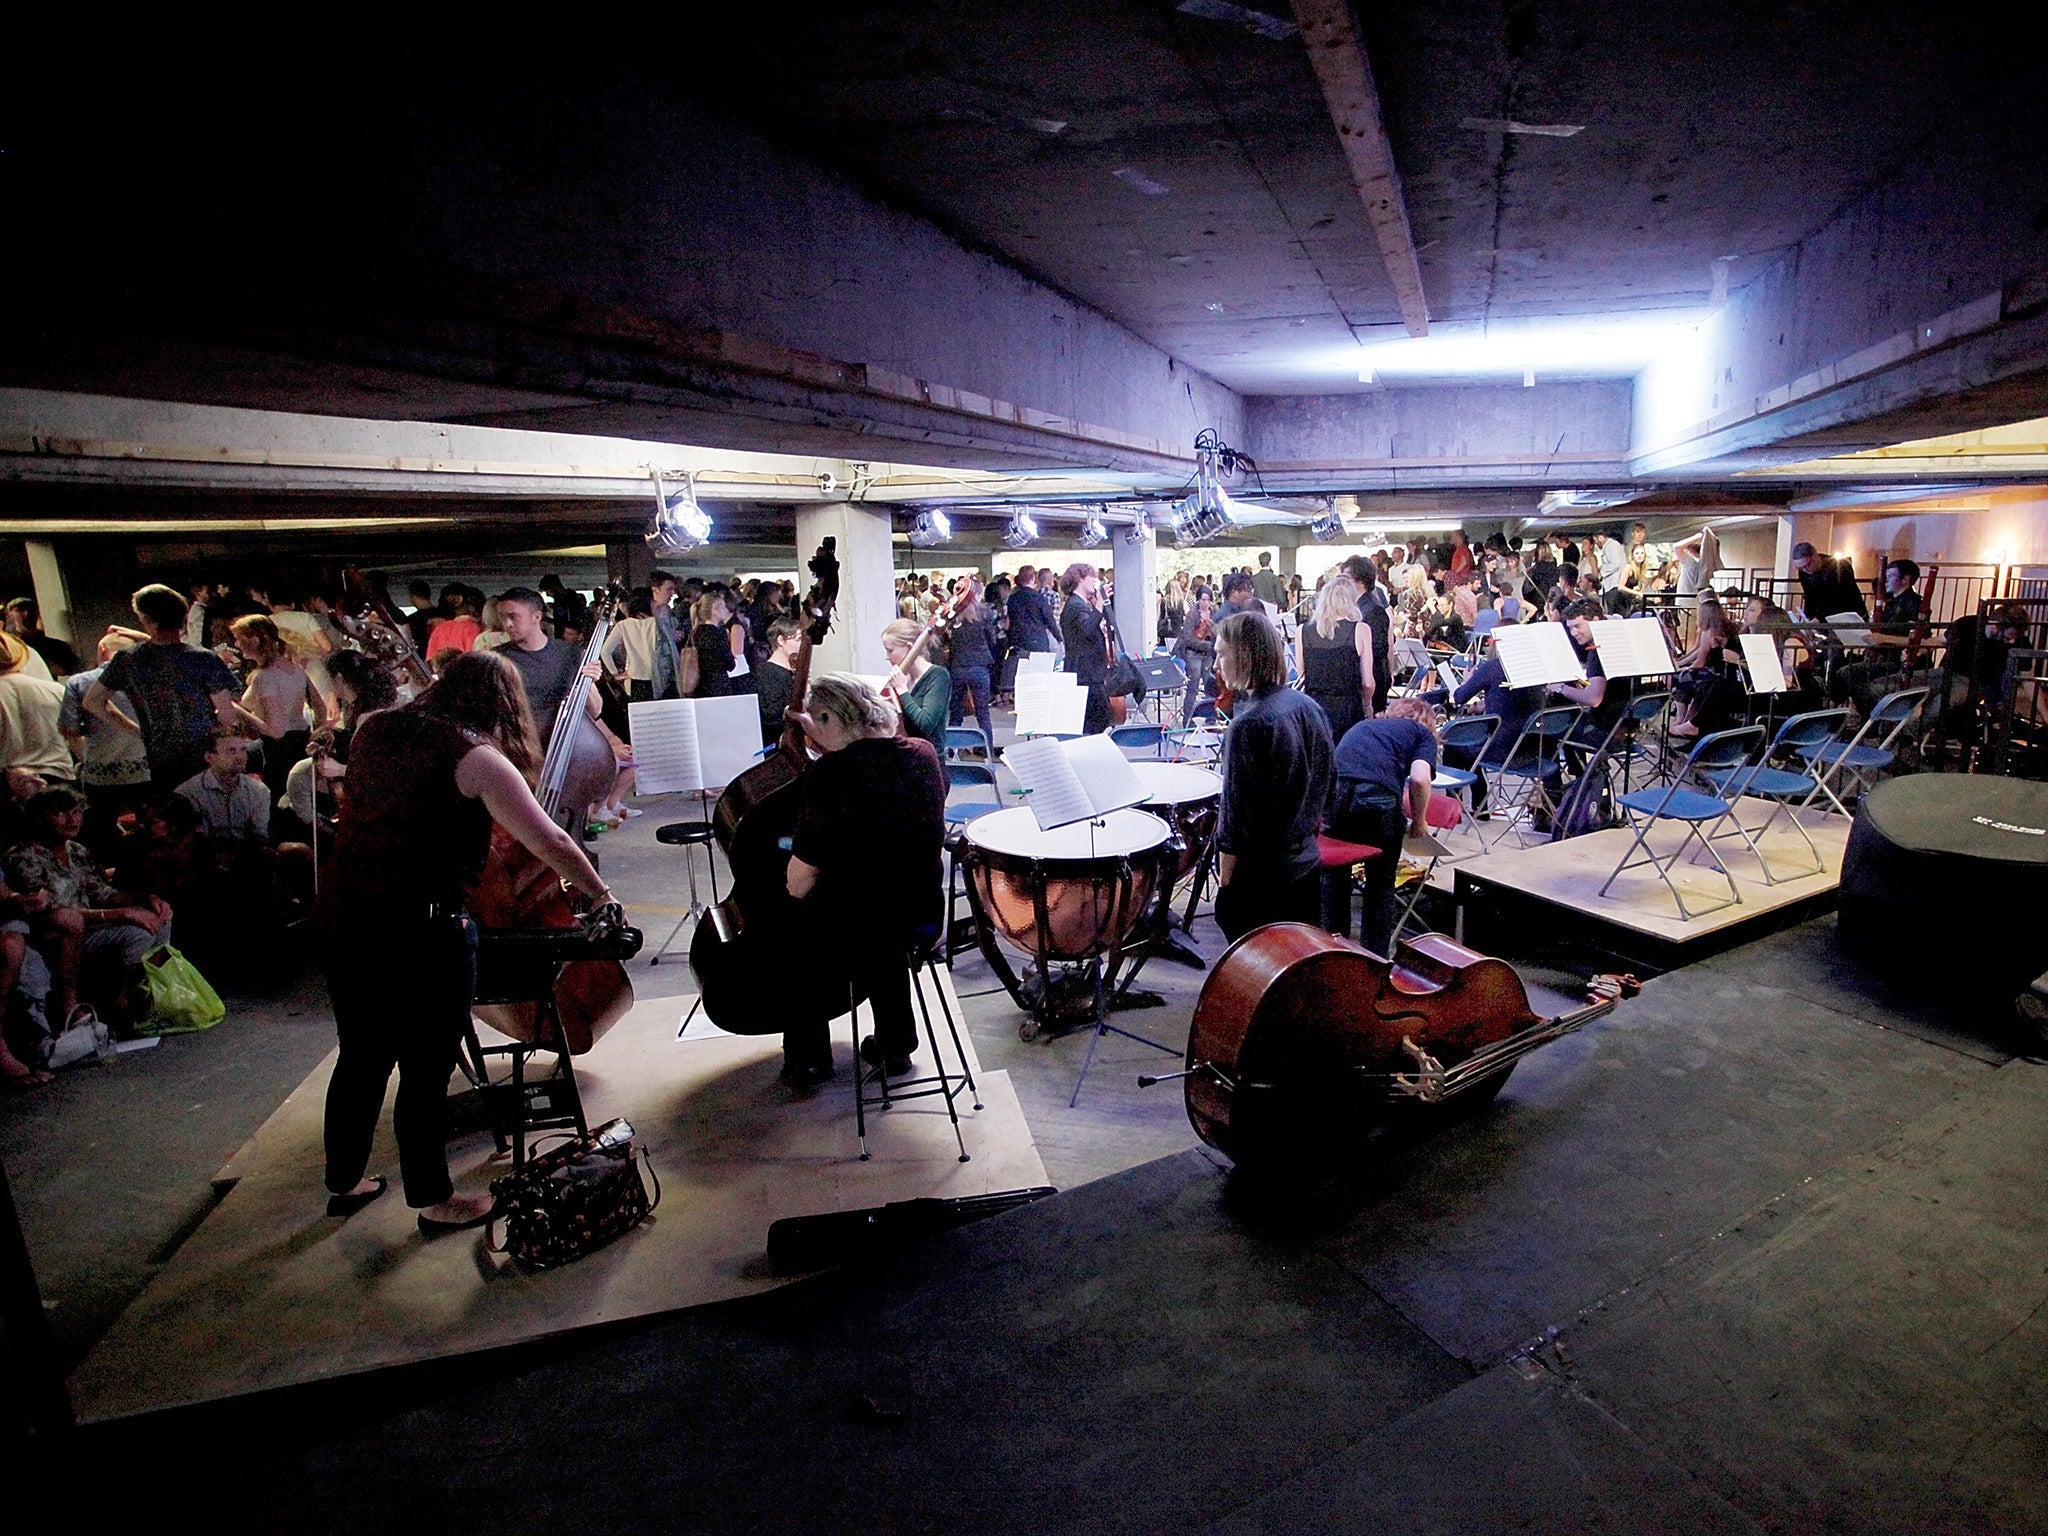 The multi-storey car park has hosted classical music performances